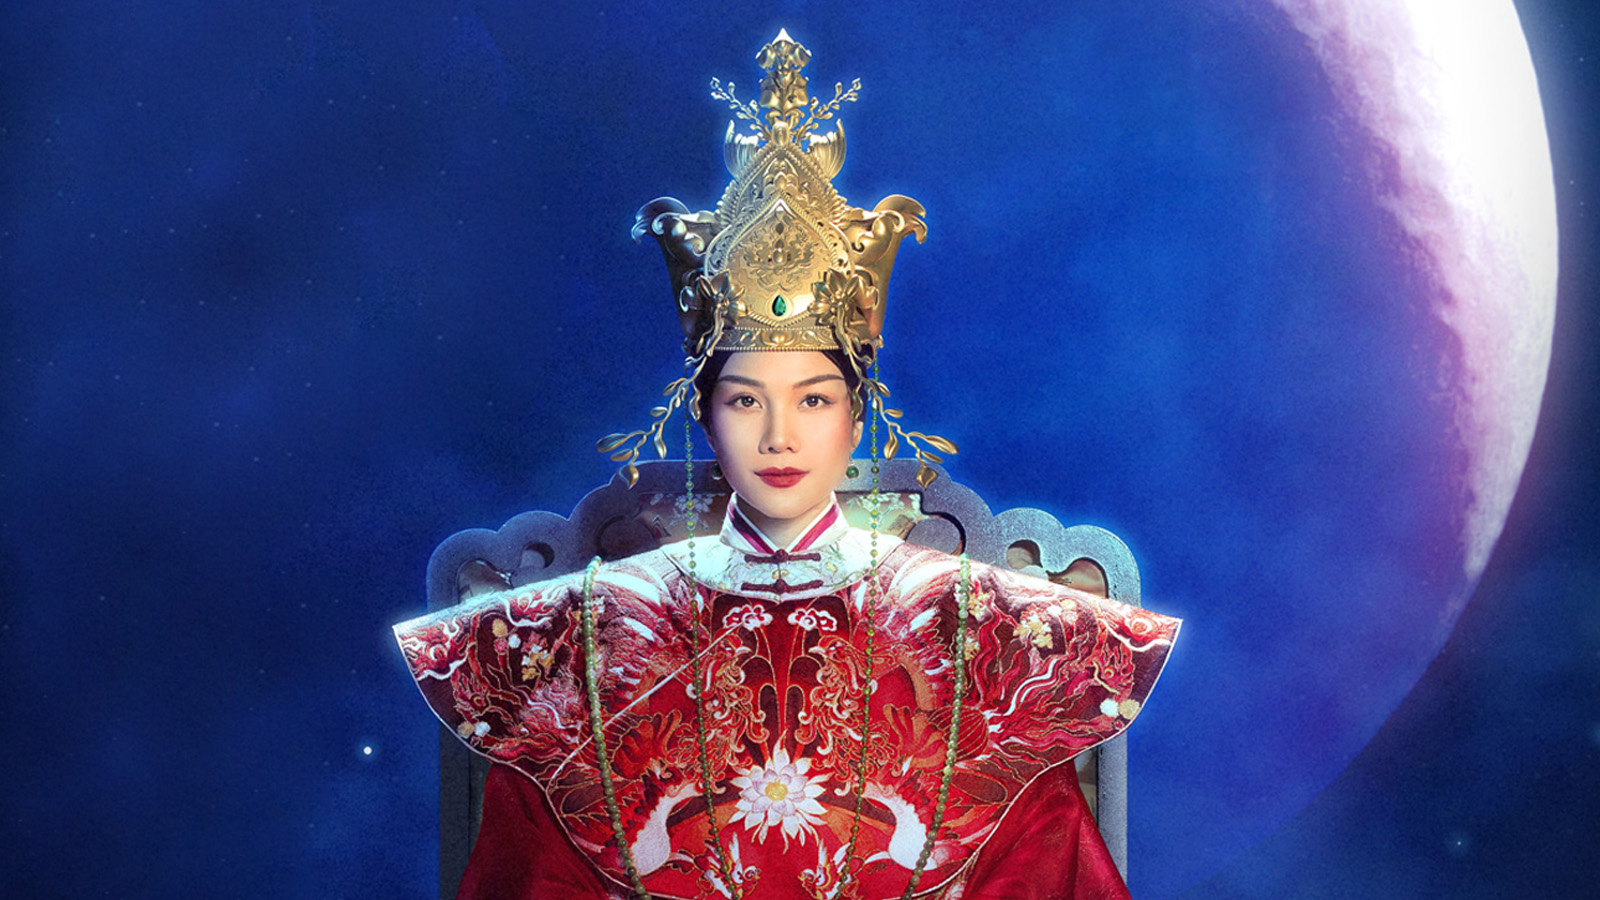 Poster for Quynh Hoa Nhat Da (Queen of the Night), a production by director Ly Minh Thang, will be distributed by CJ Entertainment Vietnam next year. (Photo courtesy of the producer)